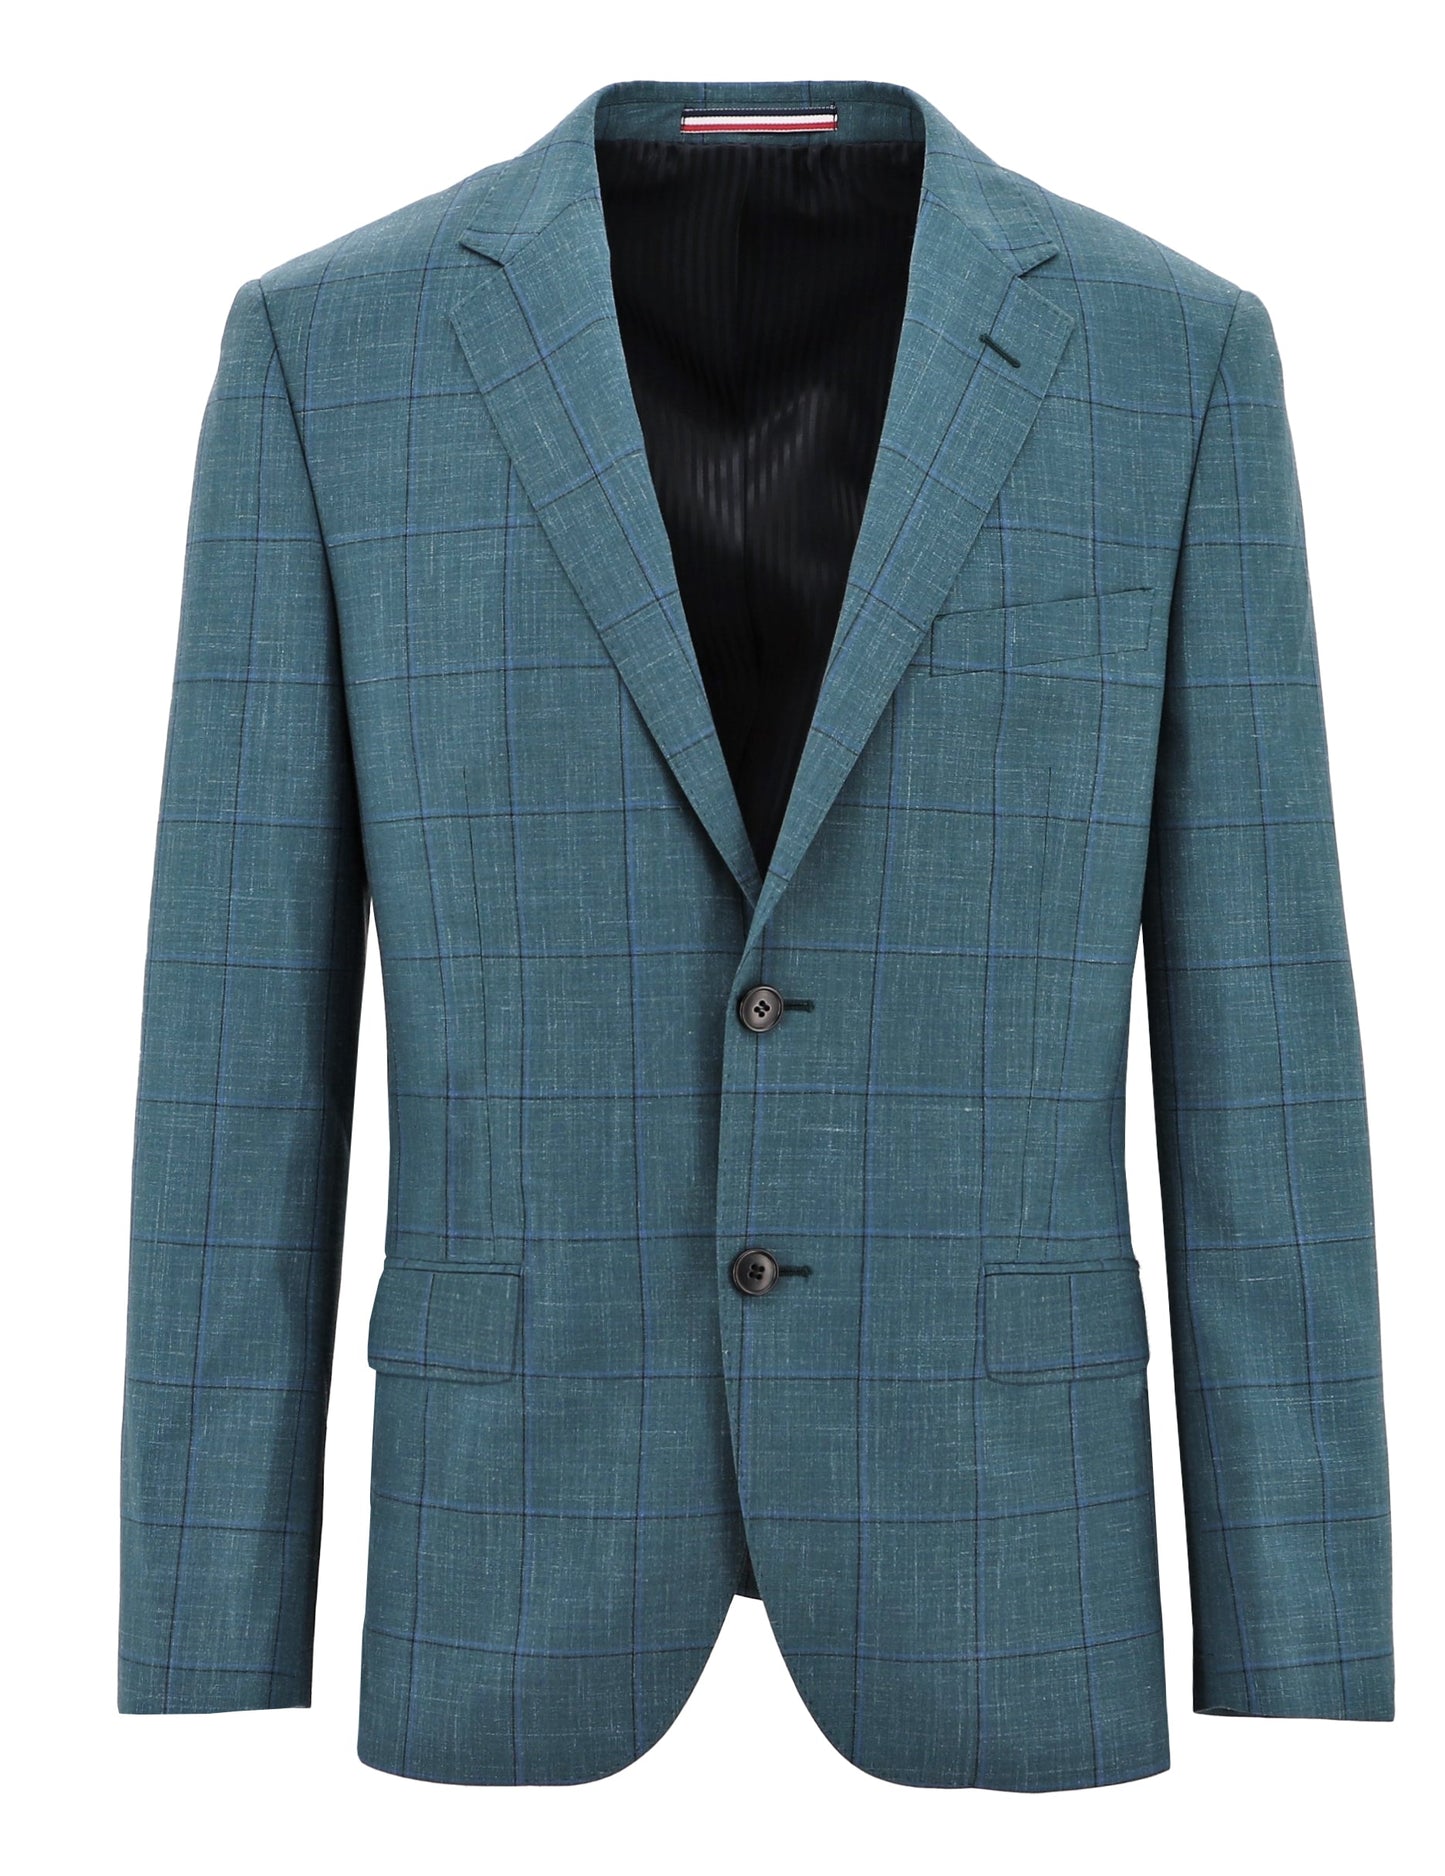 Parker Buggy Teal Checked Sports Jacket